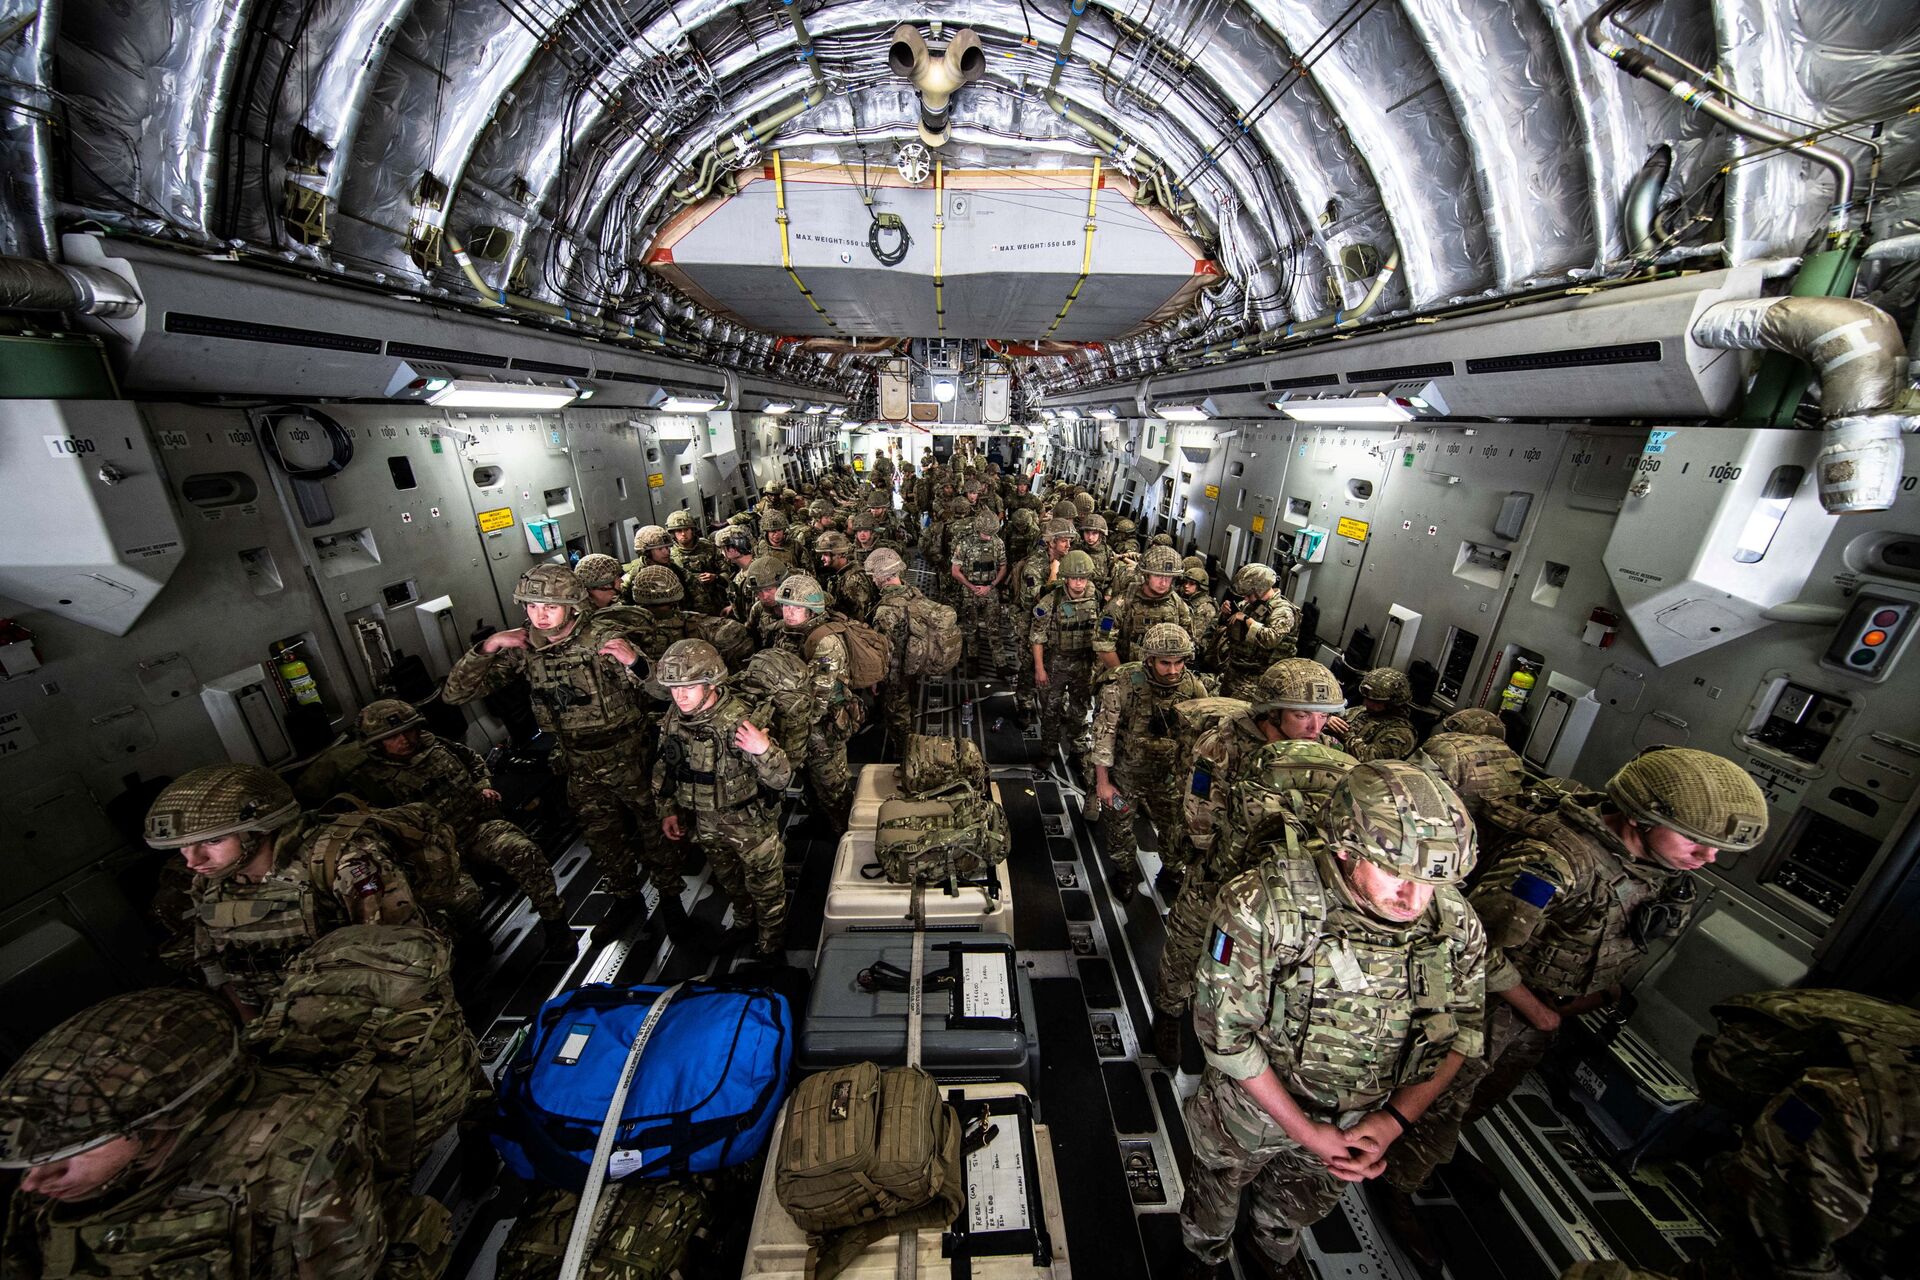 British Forces from 16 Air Assault Brigade arrive in Kabul, Afghanistan, to provide support to British nationals leaving the country, as part of Operation PITTING after Taliban insurgents took control of the presidential palace in Kabul, August 15, 2021. Leading Hand Ben Shread/RAF/UK Ministry of Defence 2021/Handout via REUTERS   THIS IMAGE HAS BEEN SUPPLIED BY A THIRD PARTY. - Sputnik International, 1920, 21.09.2021